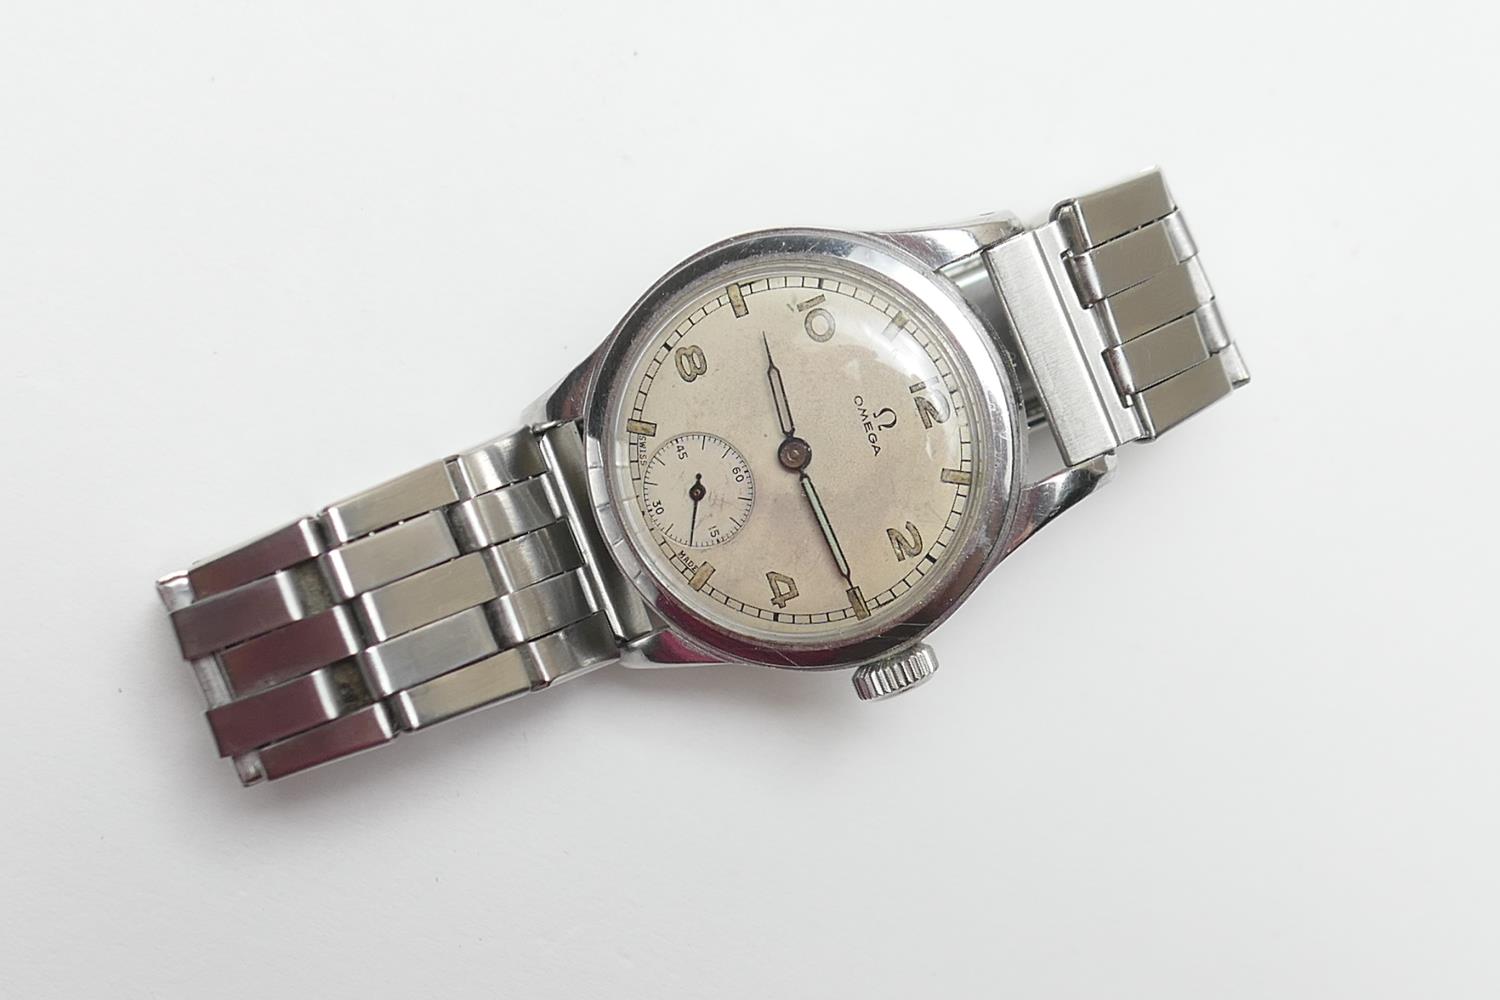 Omega stainless steel gent's vintage wristwatch, 25mm dial with luminous Arabic and baton